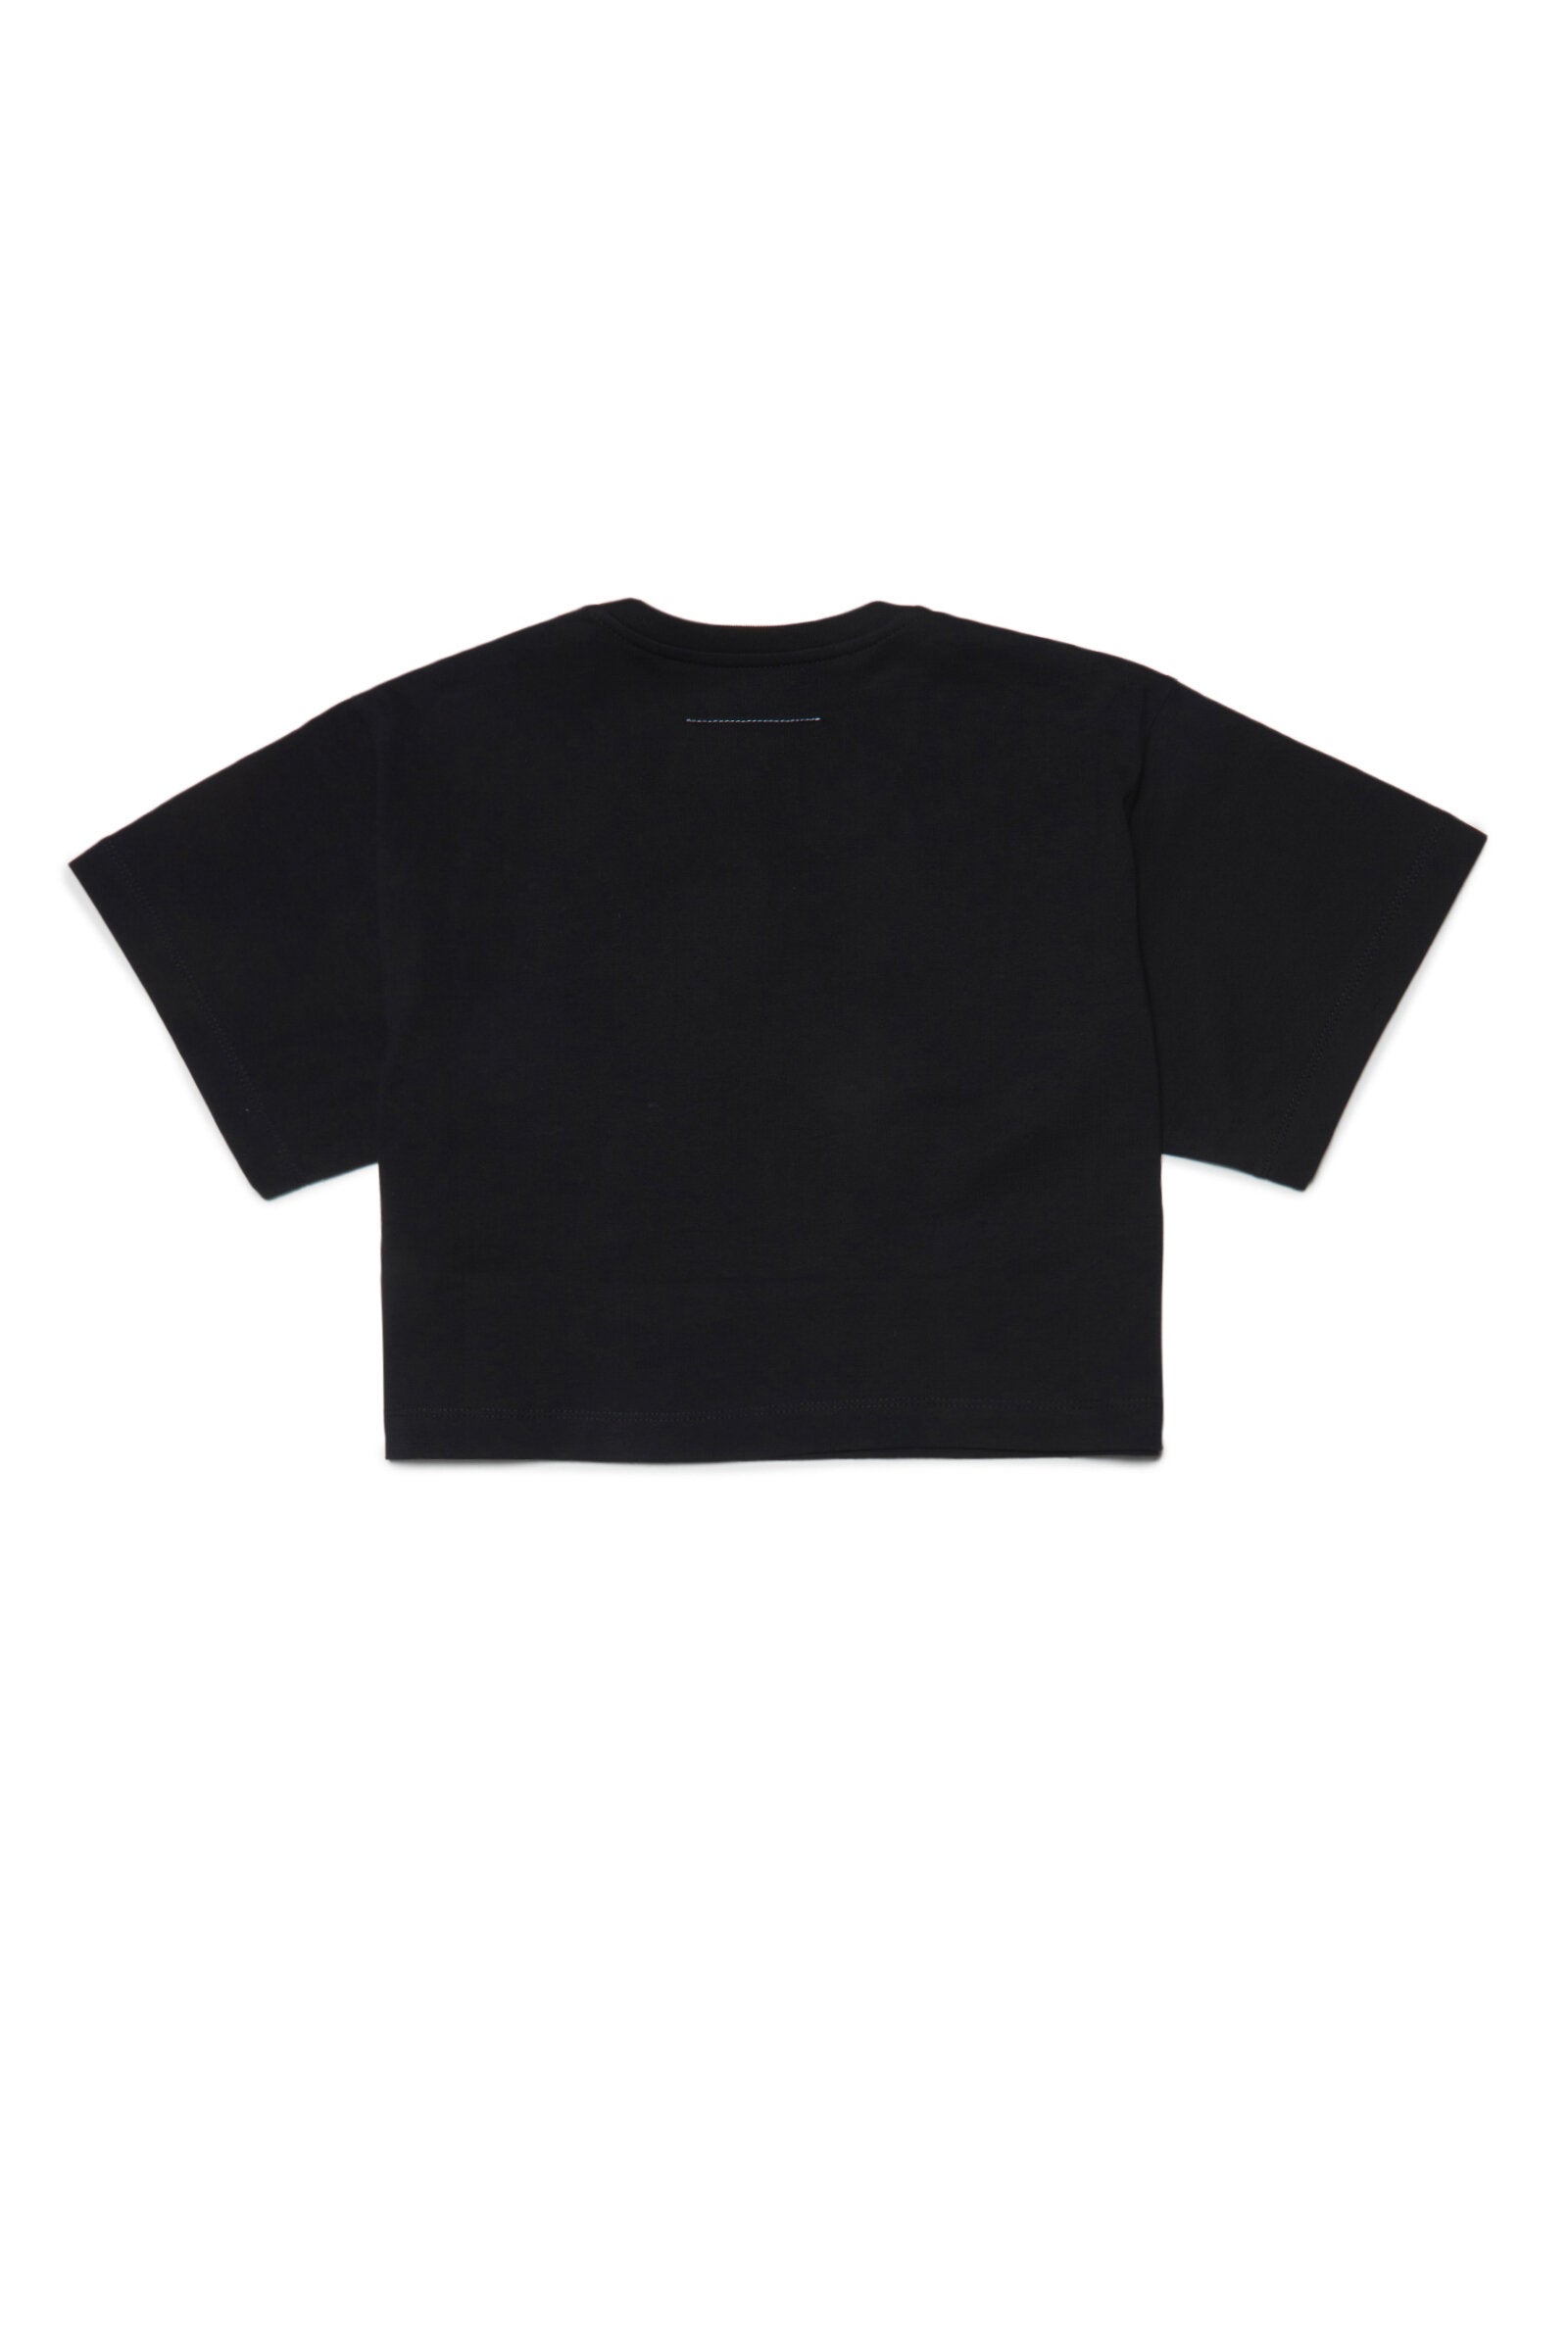 Black t-shirt in jersey with leatherette appliqué